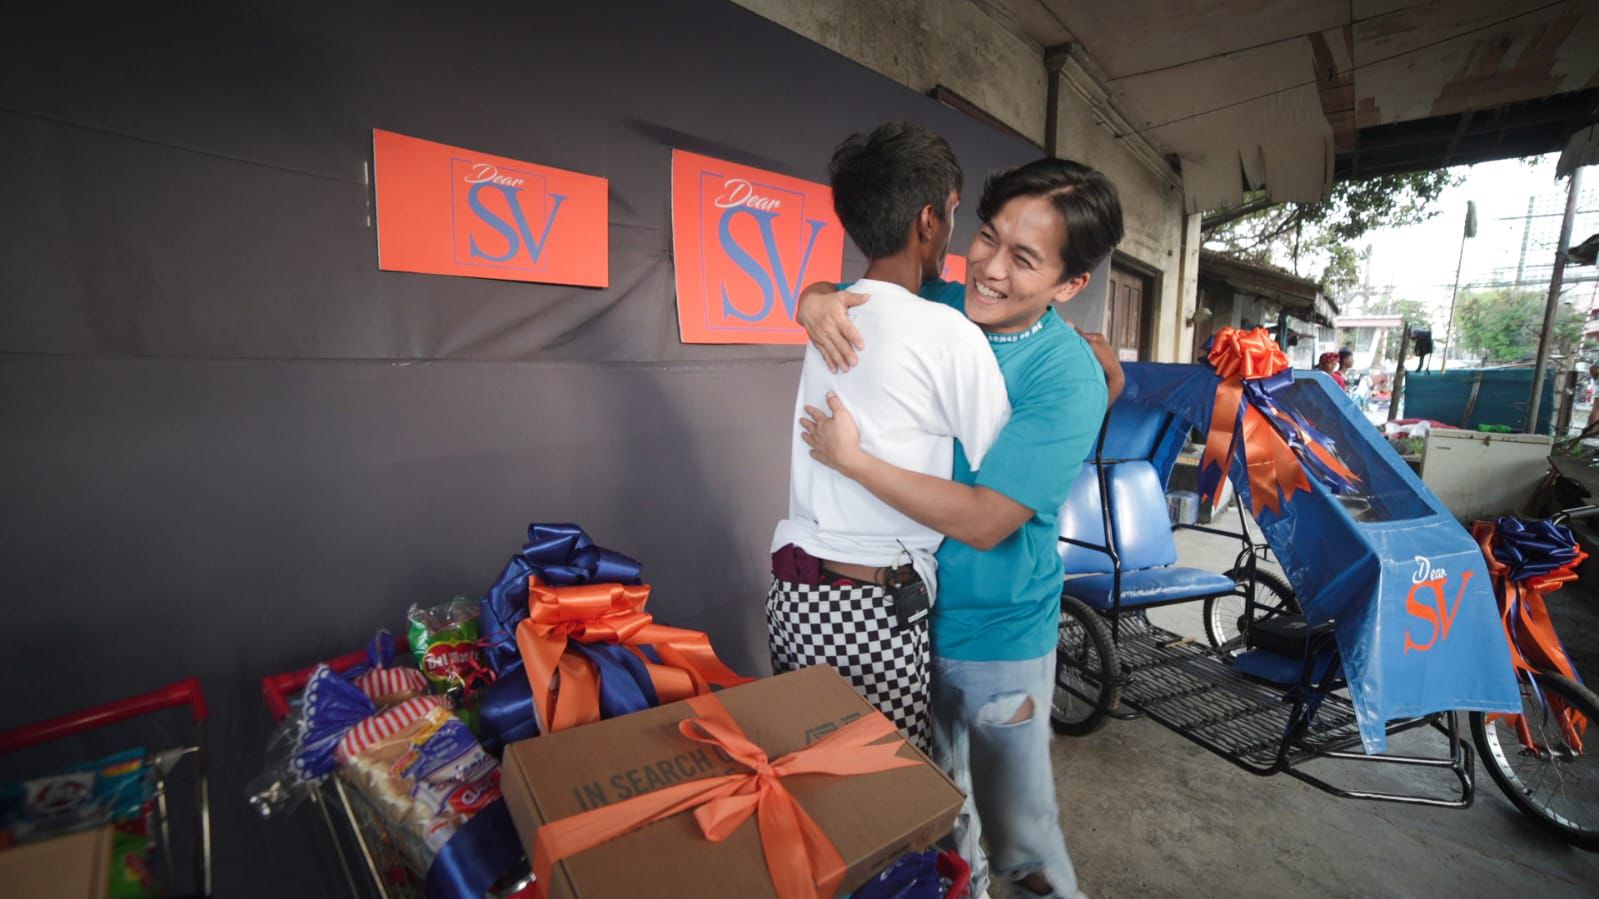 SV gifts trolley boy with new pedicab